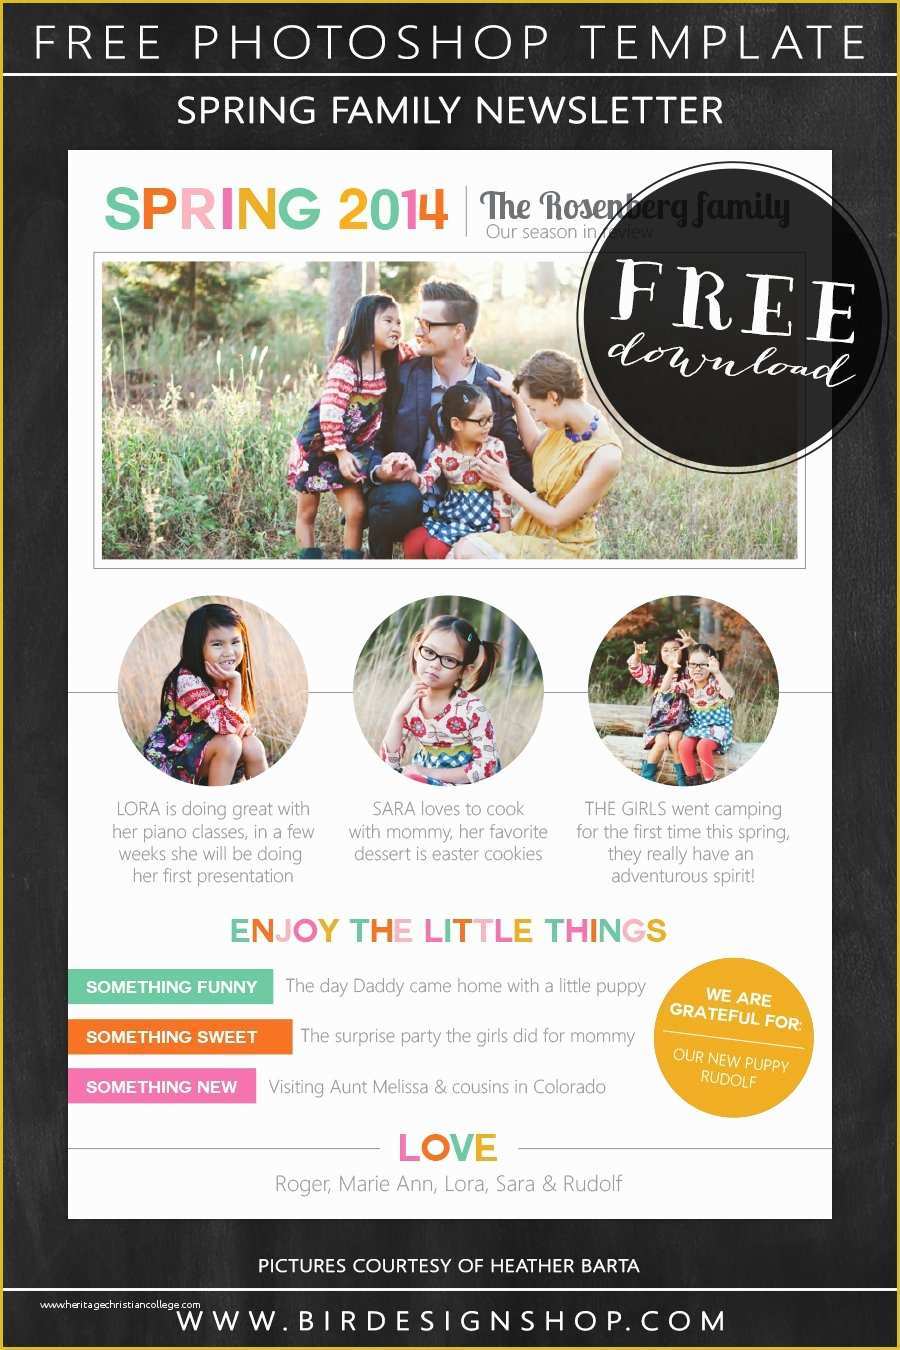 Free Photo Templates for Photoshop Of Free Photoshop Templates Shop Freebies – Birdesign